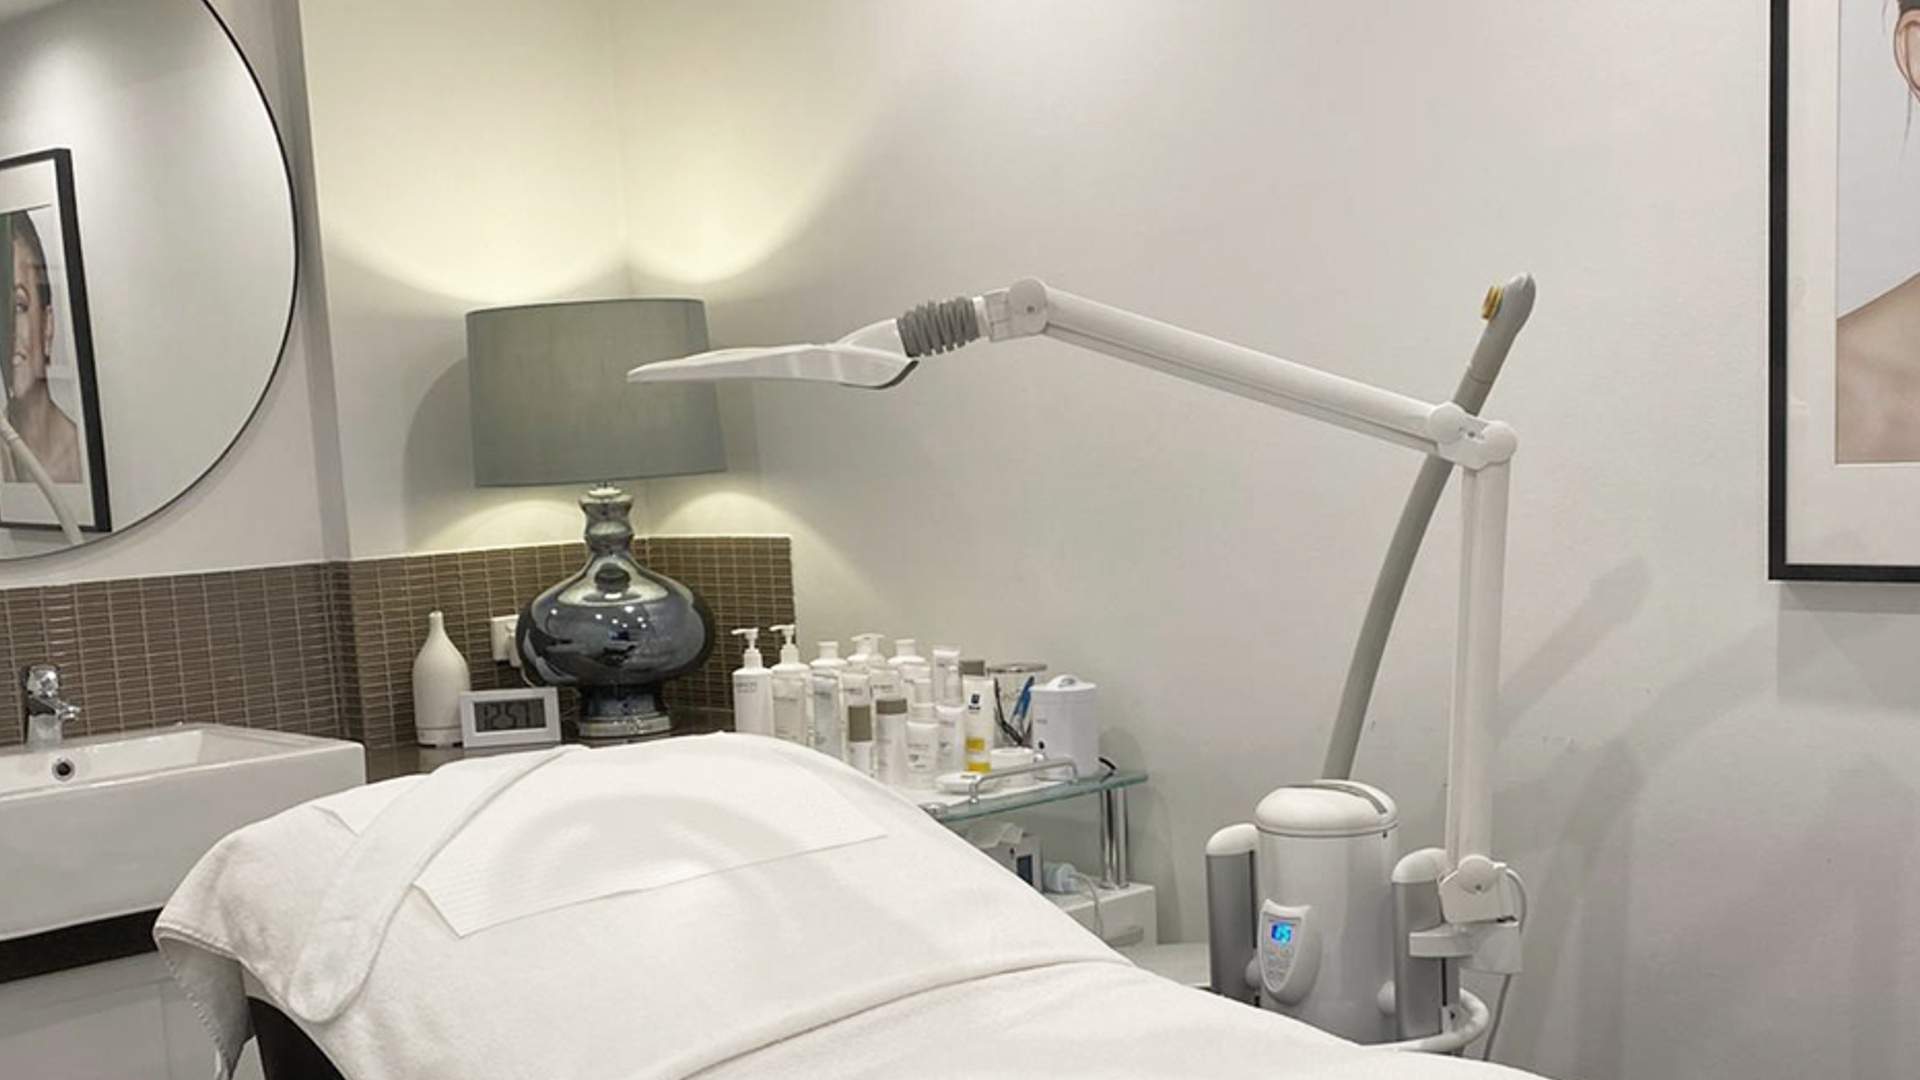 The treatment room for facials at karpati medispa - one of the best day spas in Sydney